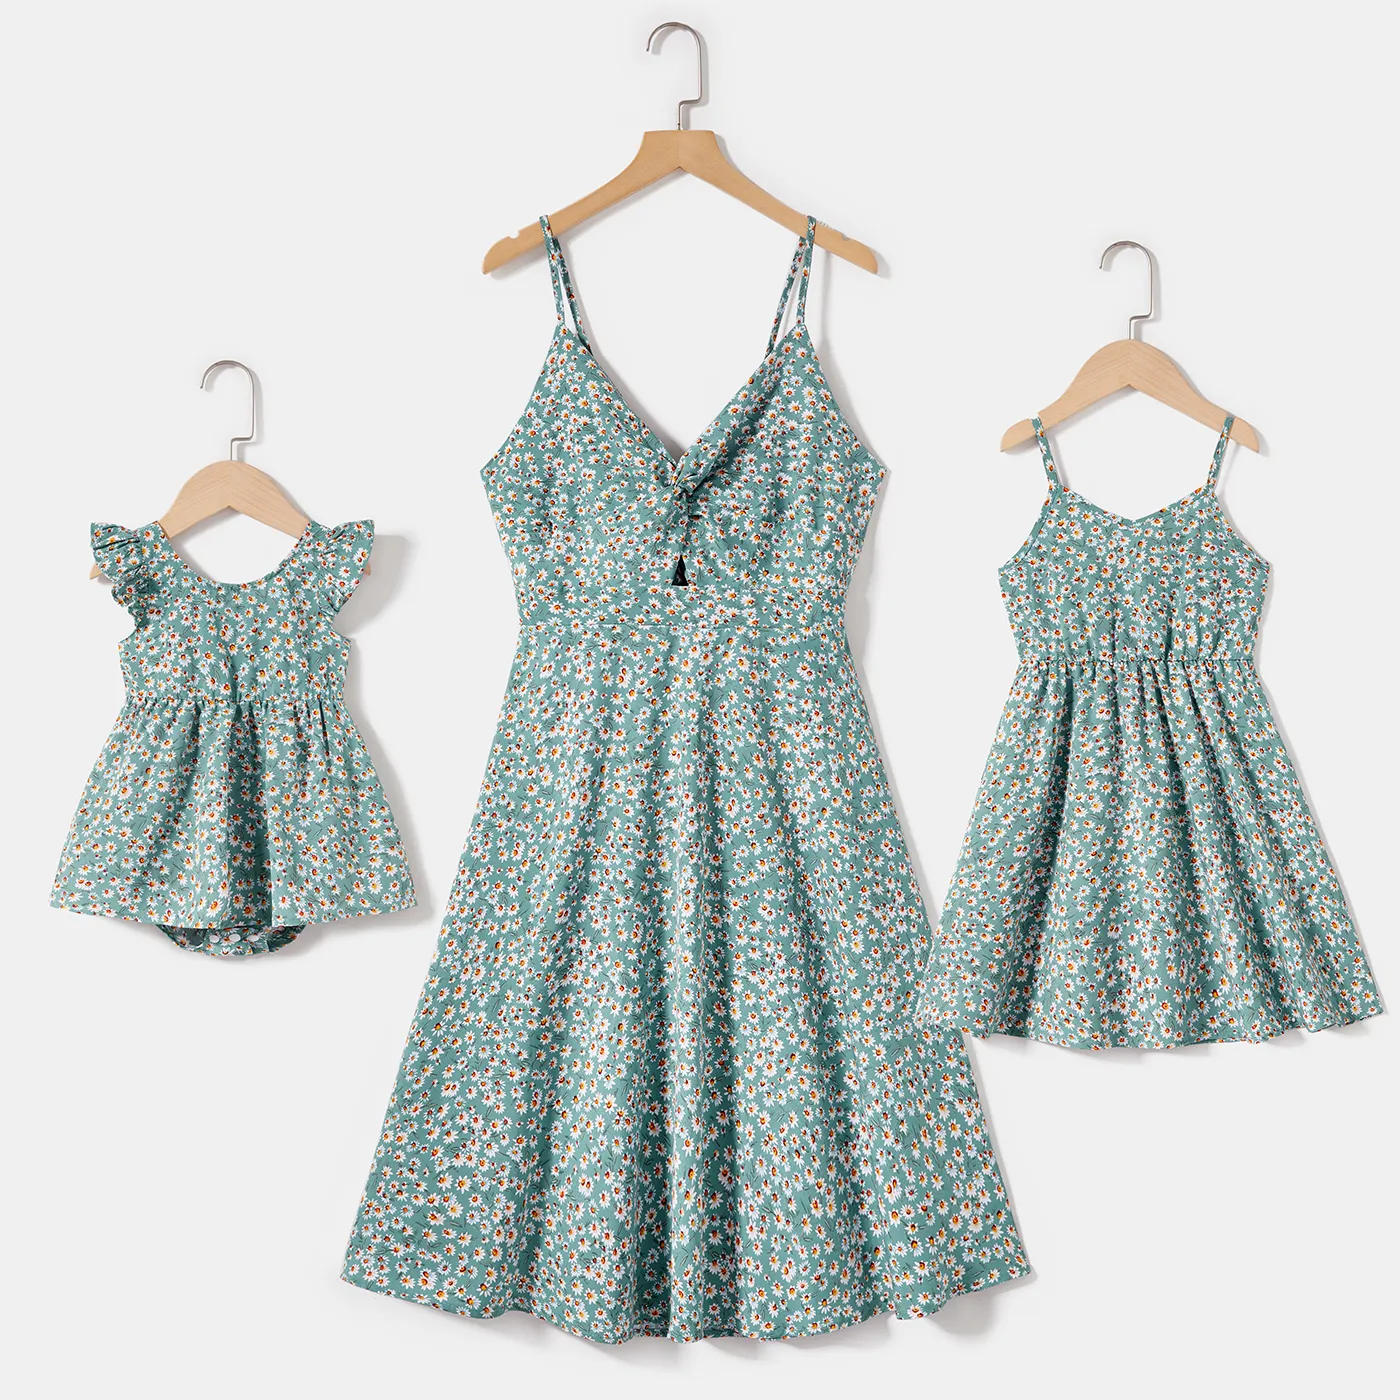 Green Floral Print Twist Front Tie Back Cami Dress for Mom and Me